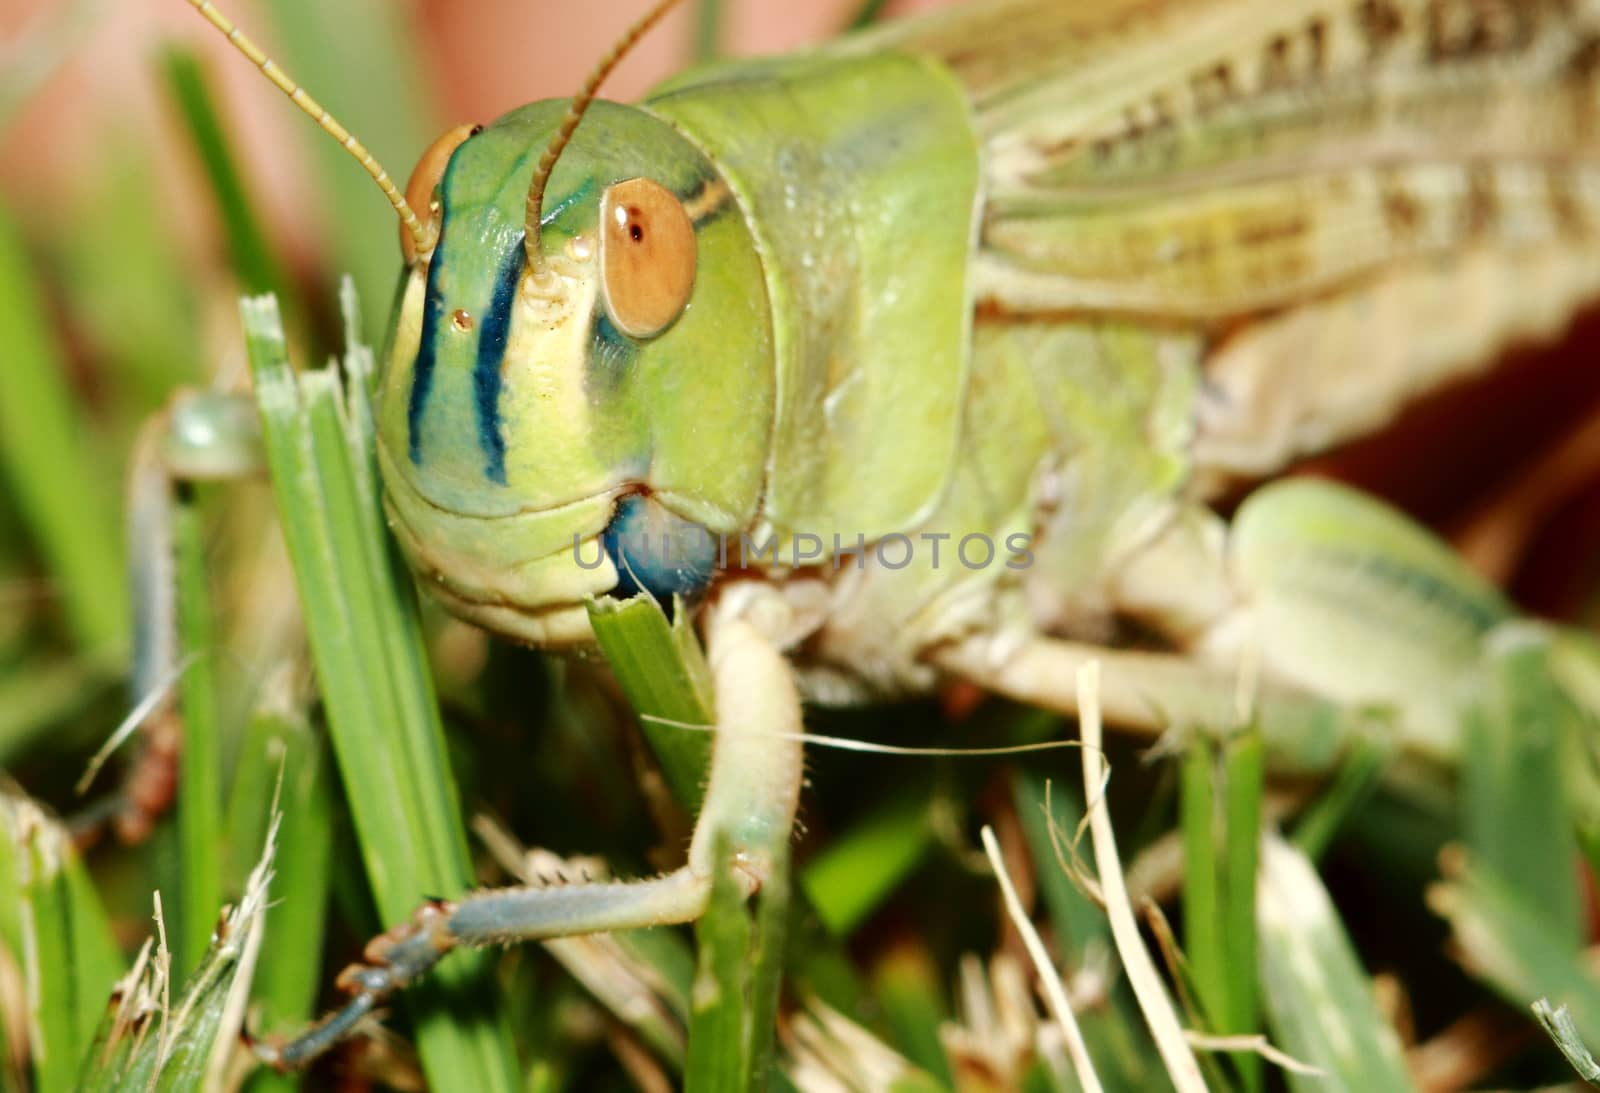 Extreme locust closeup. Grasshopper on a green leaf by selinsmo